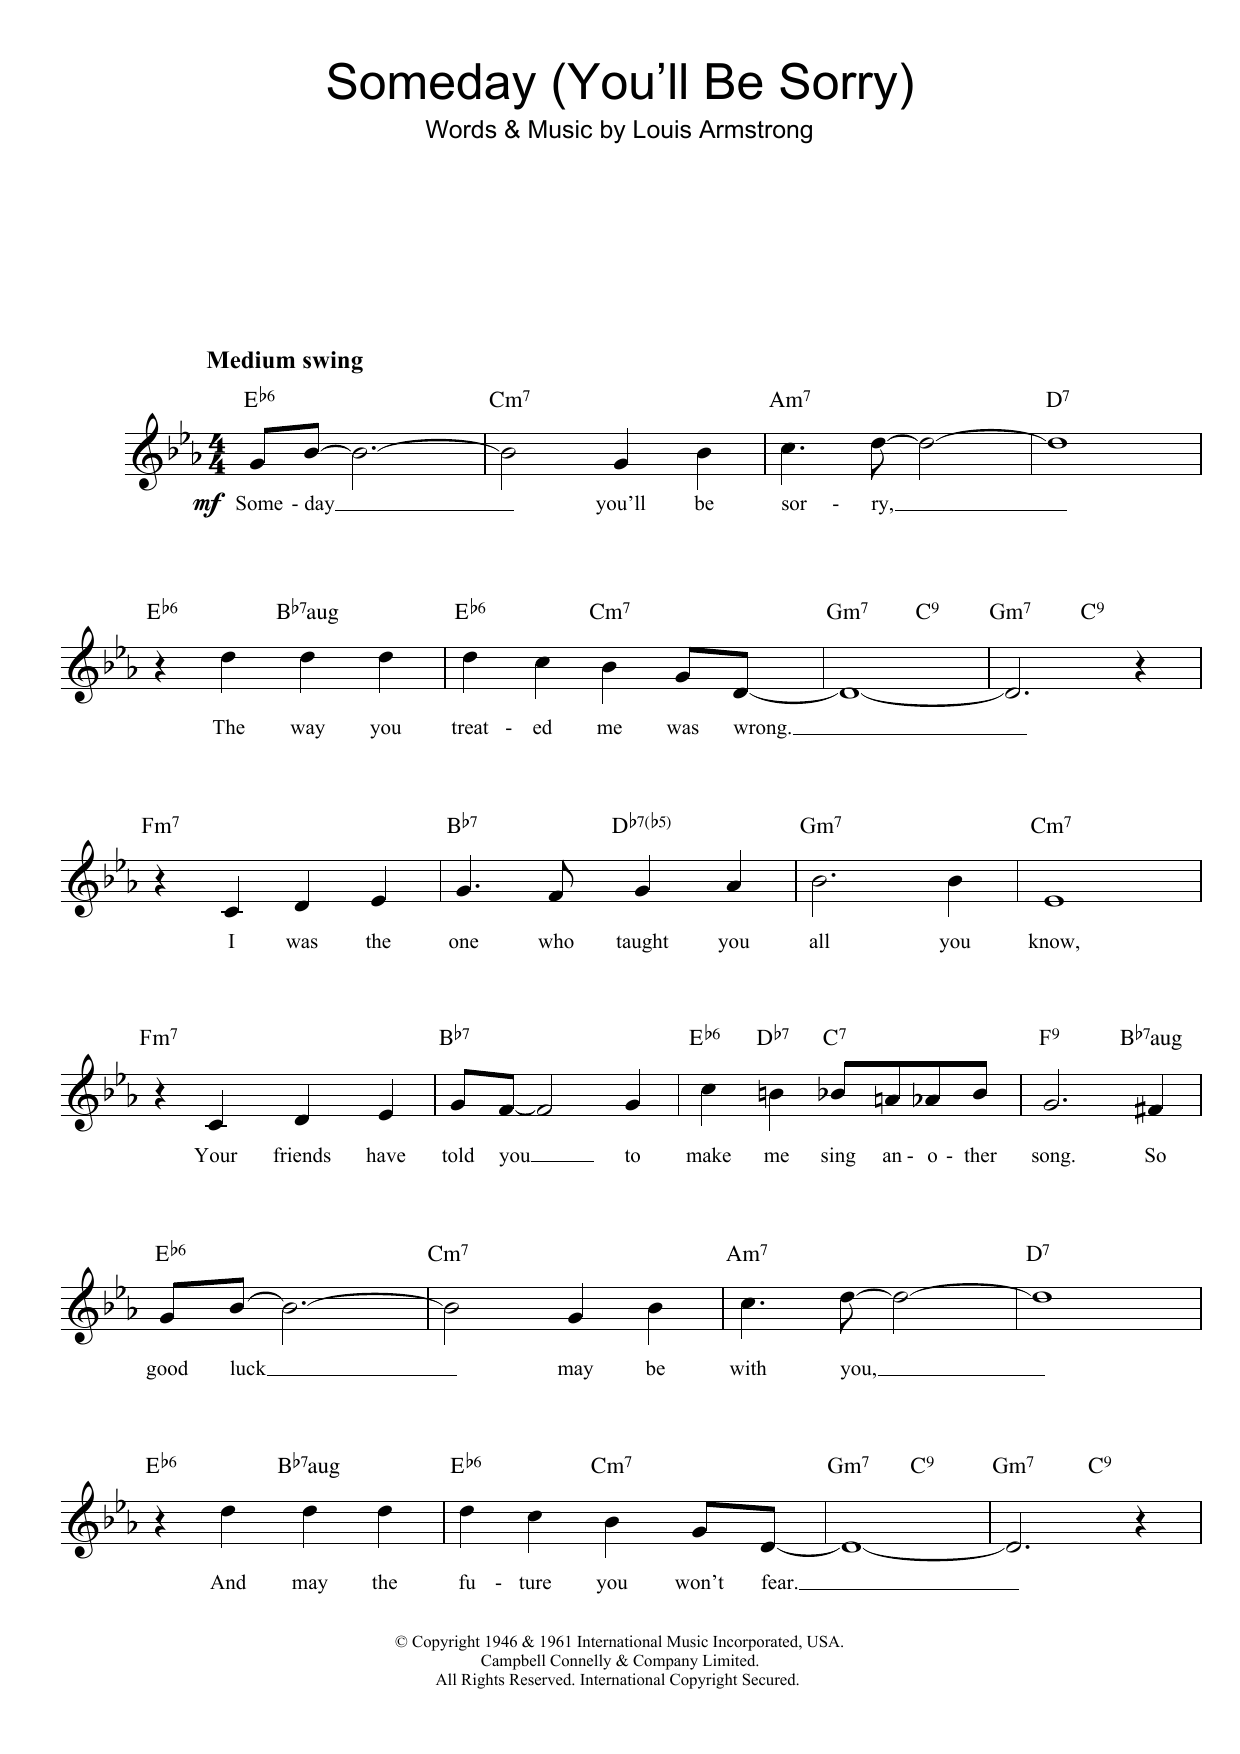 Louis Armstrong Someday (You'll Be Sorry) sheet music notes printable PDF score